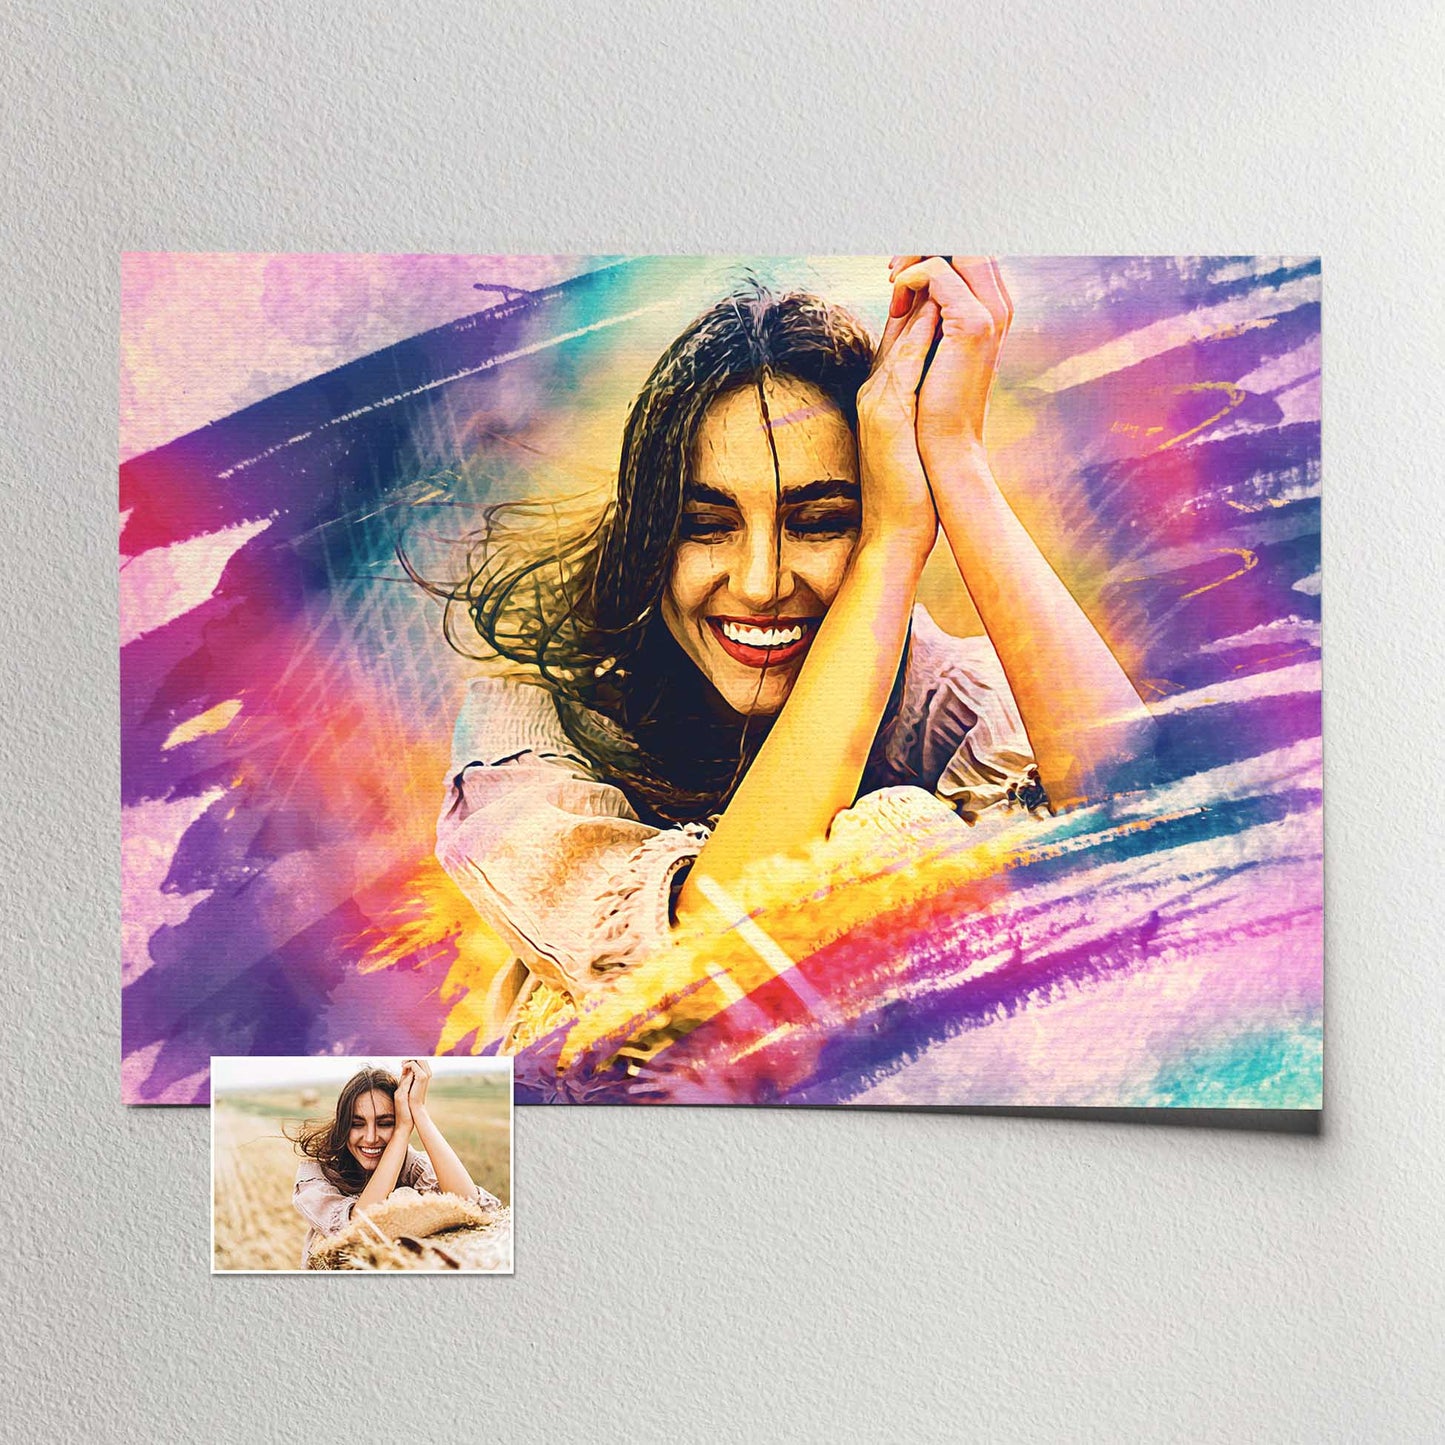 Elevate your walls with a Personalised Brush Painting Print, transforming your photo into a captivating watercolor style masterpiece with a mesmerizing brushstroke effect. The vibrant purple, pink, and blue hues bring a trendy and cool print